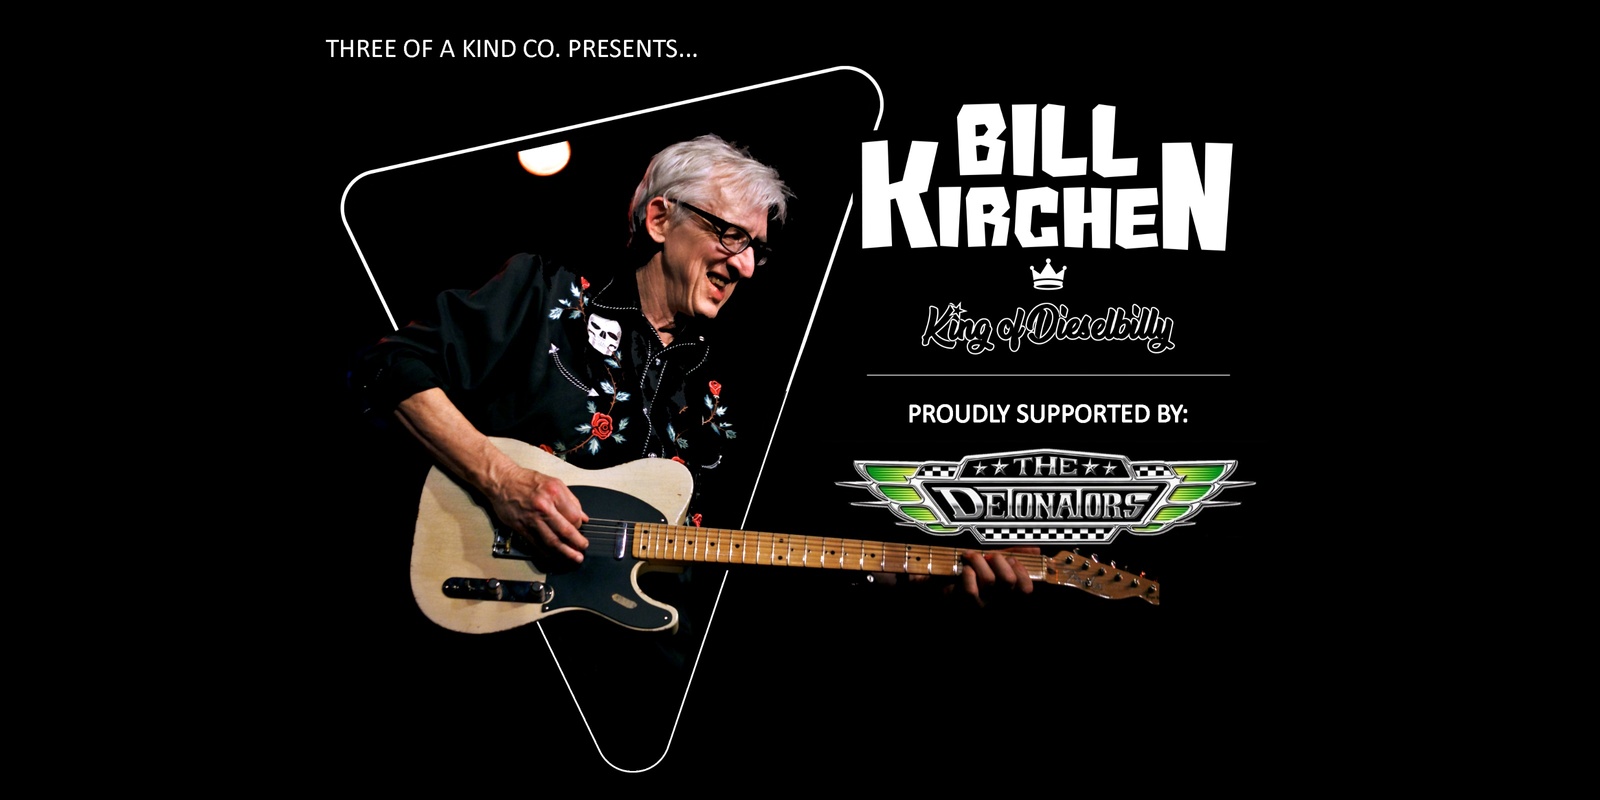 Banner image for Bill Kirchen “King of Diselbilly”  with “Australia’s High Priests of Roots Rock n Roll”  The Detonators